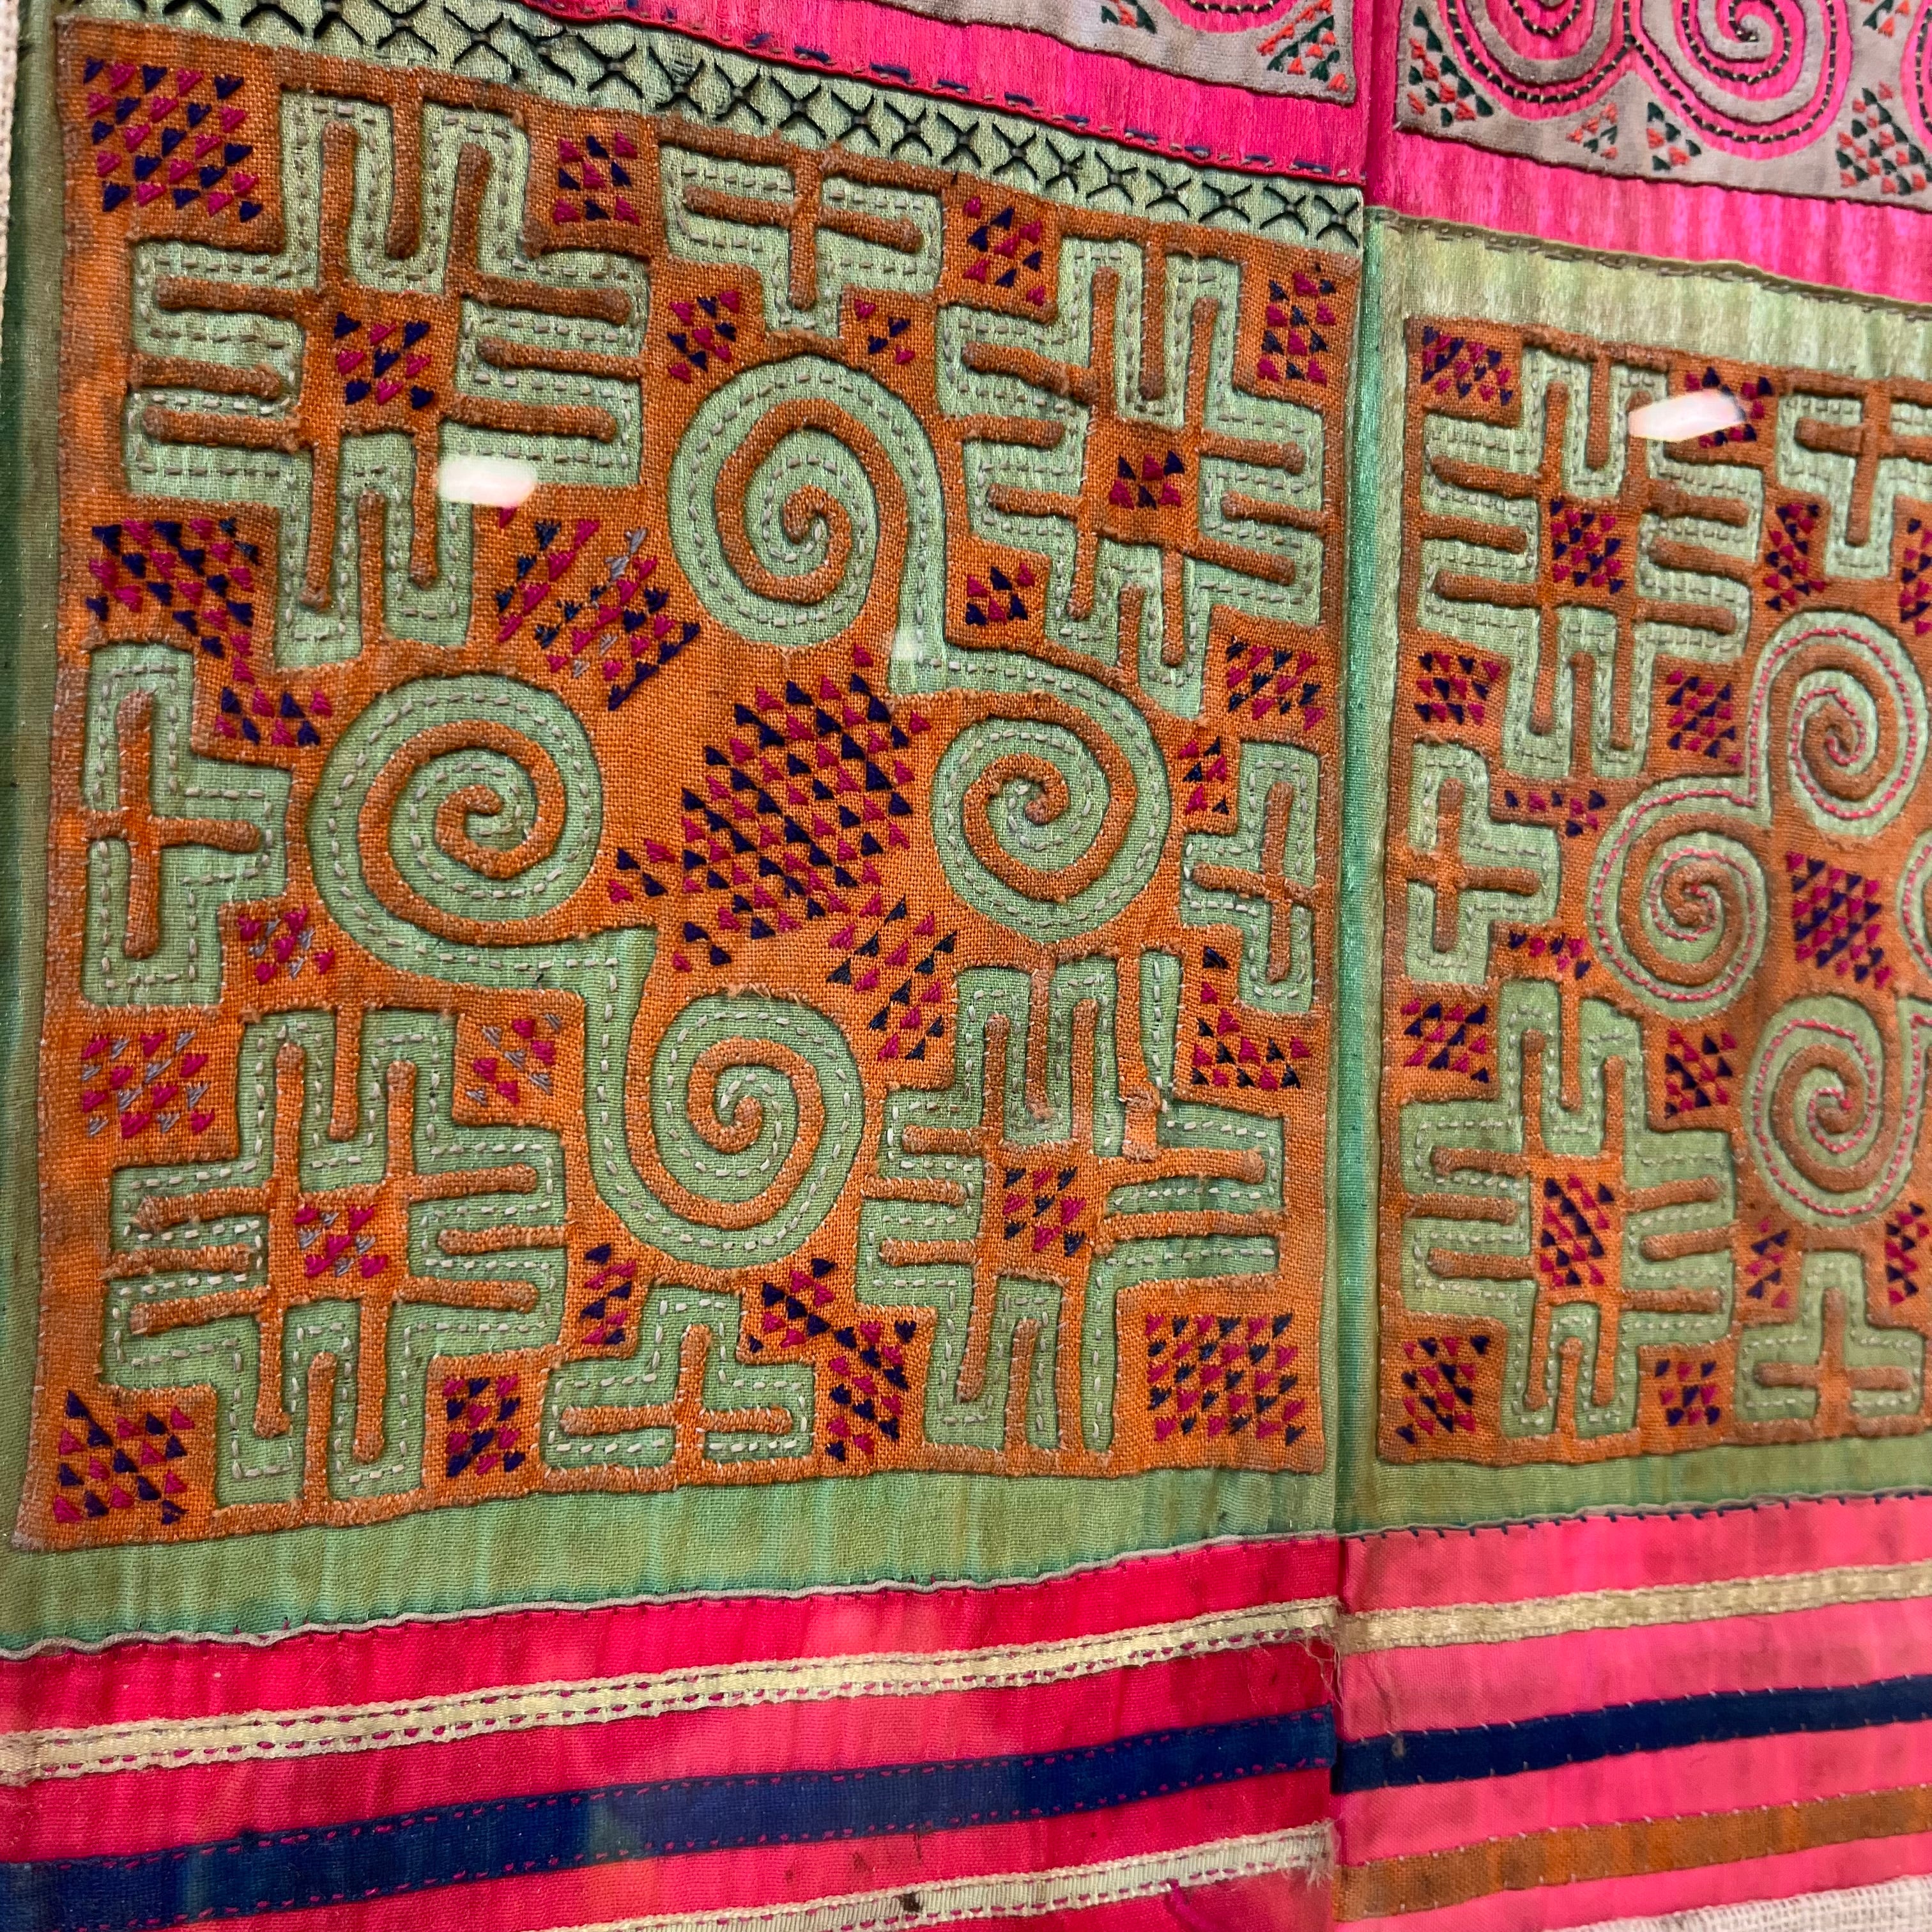 Laos Hmong Hill Tribe Hand Embroidered Textile 13.25"x 17.5"